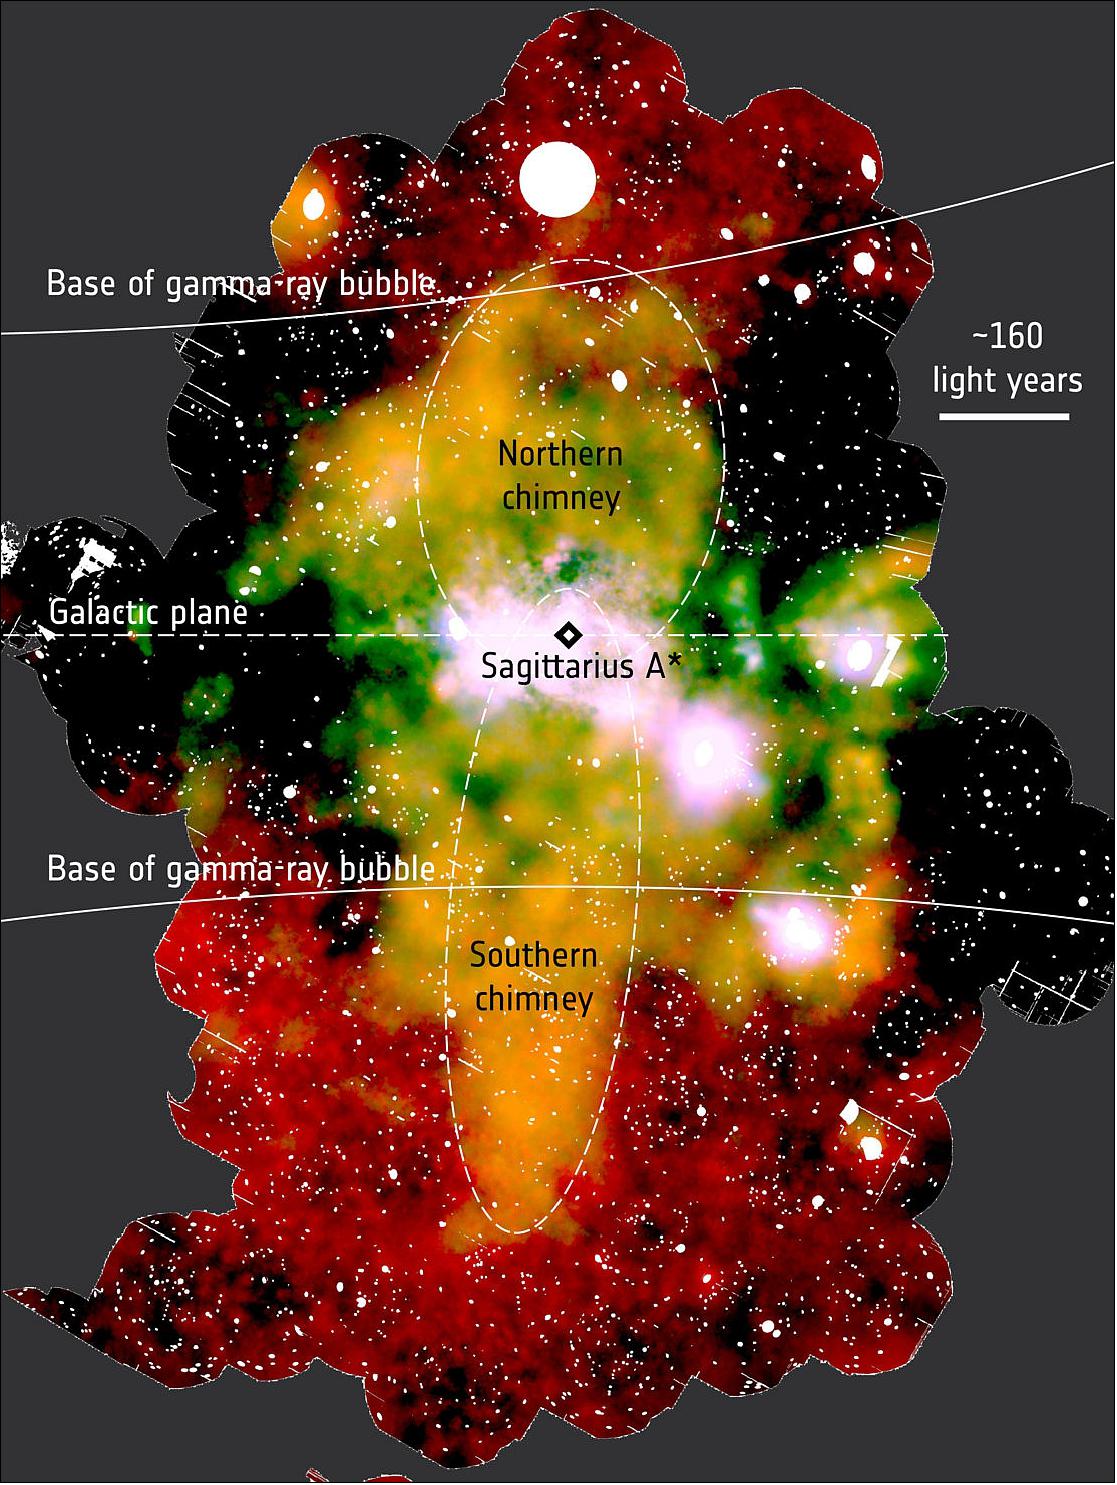 Figure 60: An X-ray view of the center of our Milky Way galaxy, where the supermassive black hole Sagittarius A* is hosted. This image, obtained with ESA’s XMM-Newton space observatory, shows the temperature of the X-ray emitting gas in this turbulent region, with cooler regions shown in red and hotter regions in green and blue. The bright area at the middle of the image identifies the vicinity of Sagittarius A*. The yellow-orange features streaming above and below the center are two colossal ‘chimneys’, extending hundreds of light-years each, that funnel material from the Galactic center into two huge cosmic bubbles. This view combines data collected in the following energy bands: 1.5–2.6 keV (shown in red); 2.35– 2.56 keV (shown in green); 2.7–2.97 keV band (shown in blue). The many white patches, large and small, are artifacts where unrelated, bright, point-like X-ray sources have been removed from the image (image credit: ESA/XMM-Newton/G. Ponti et al. 2019, Nature)